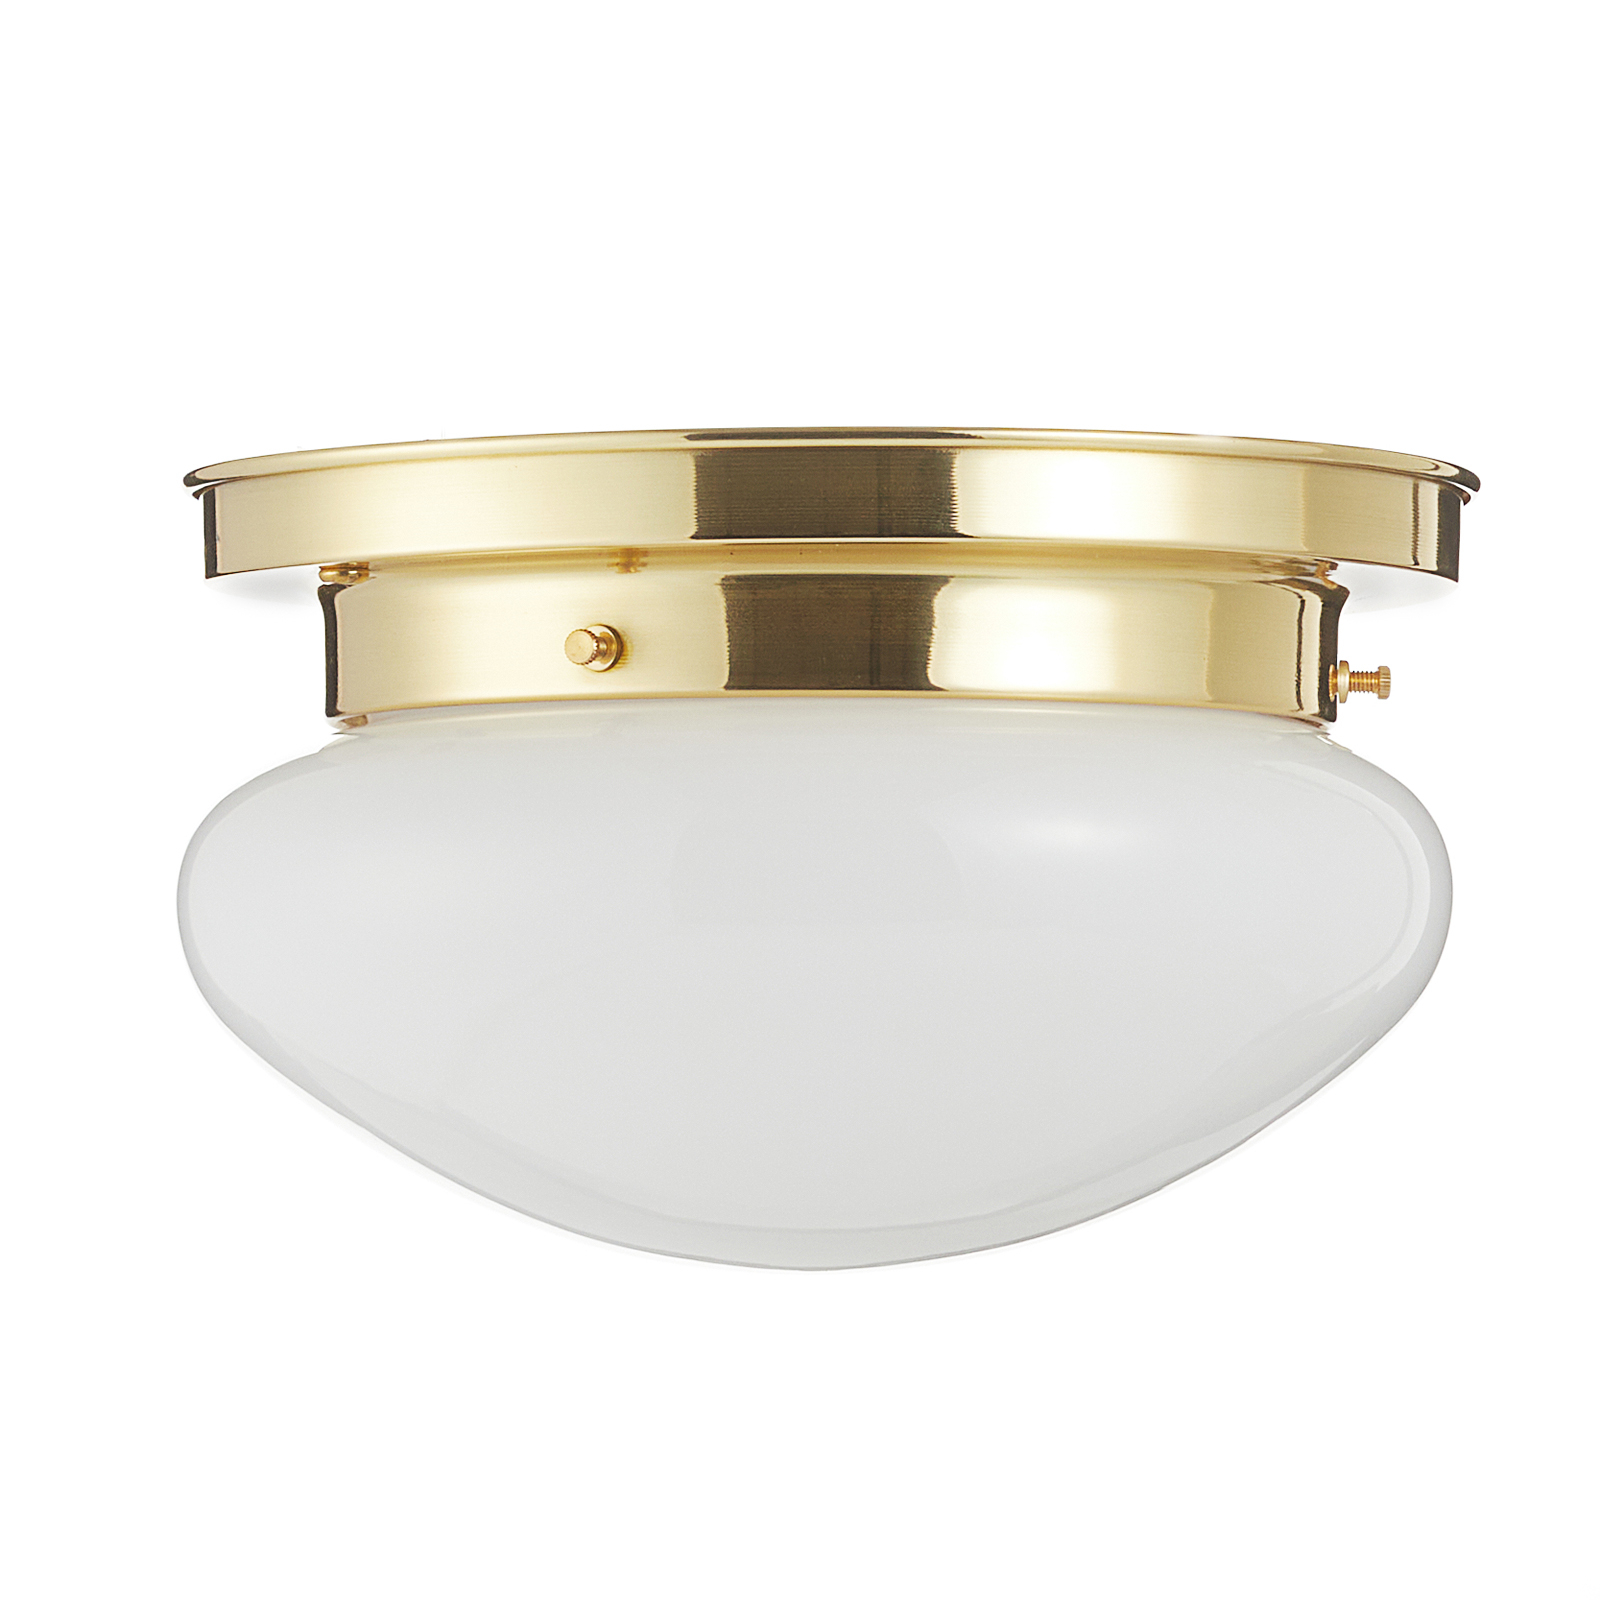 HARRY ceiling light with polished brass